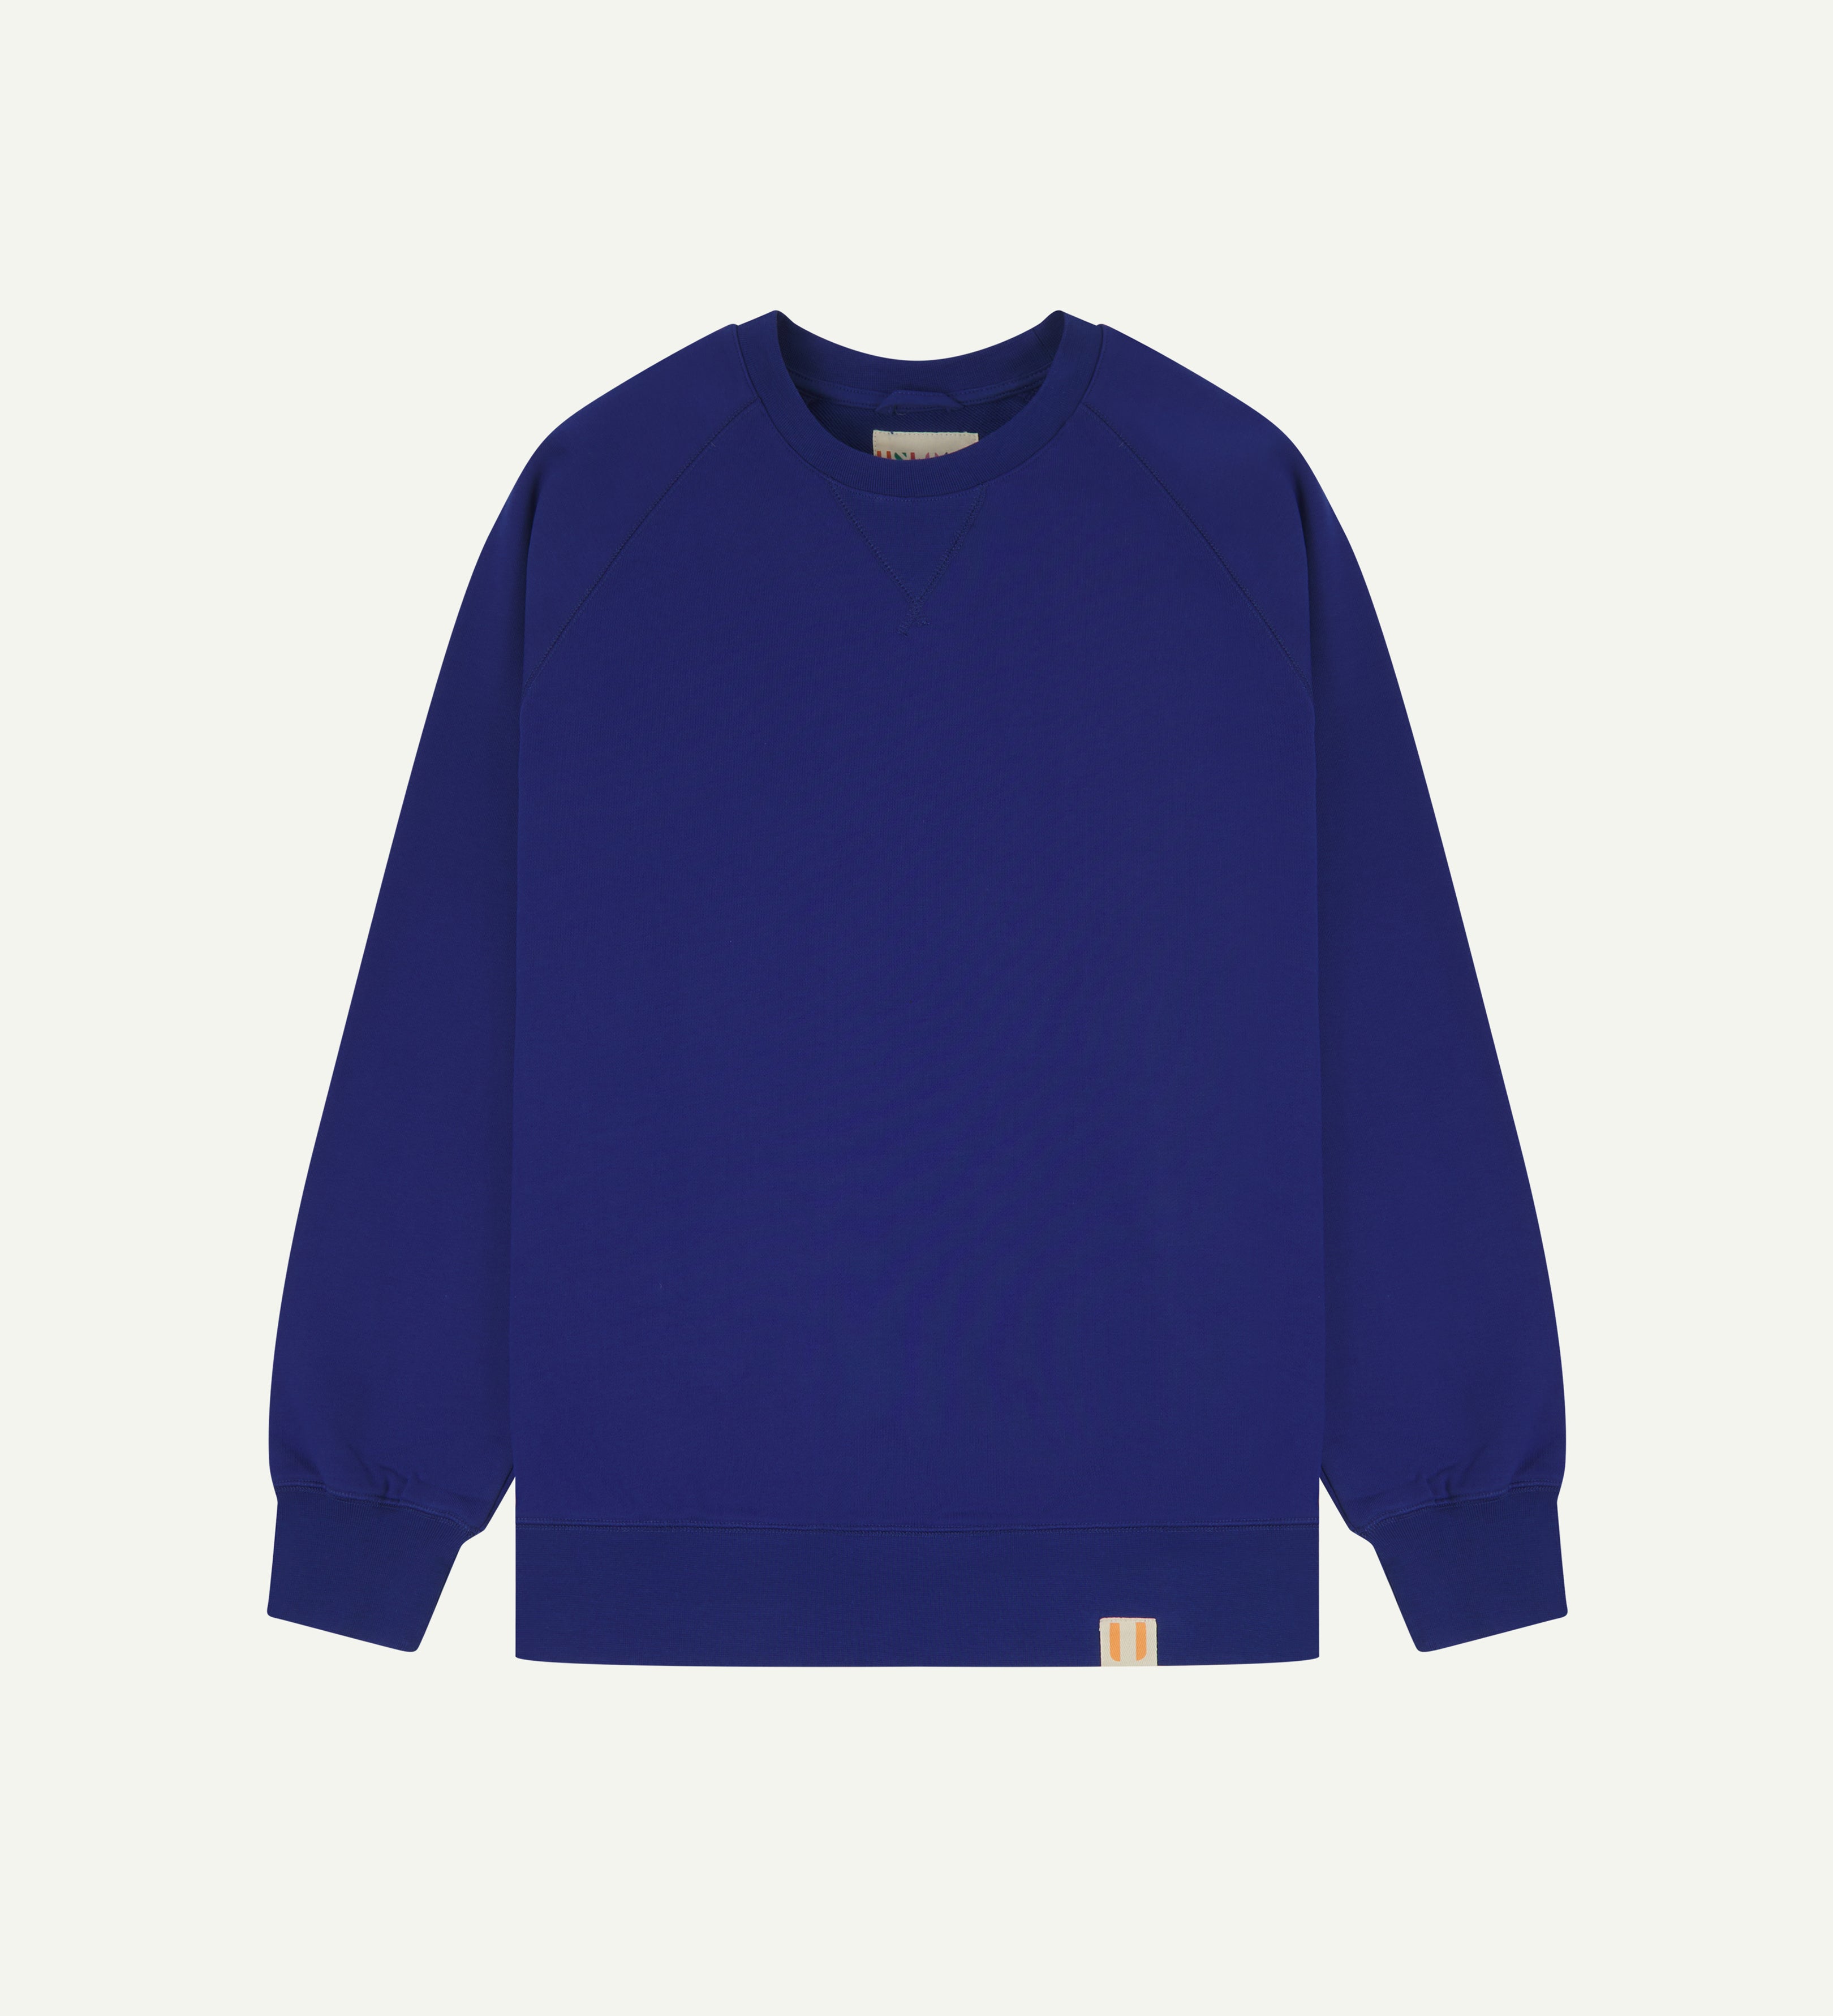 Front view of bright blue men's organic heavyweight cotton #7005 sweatshirt by Uskees